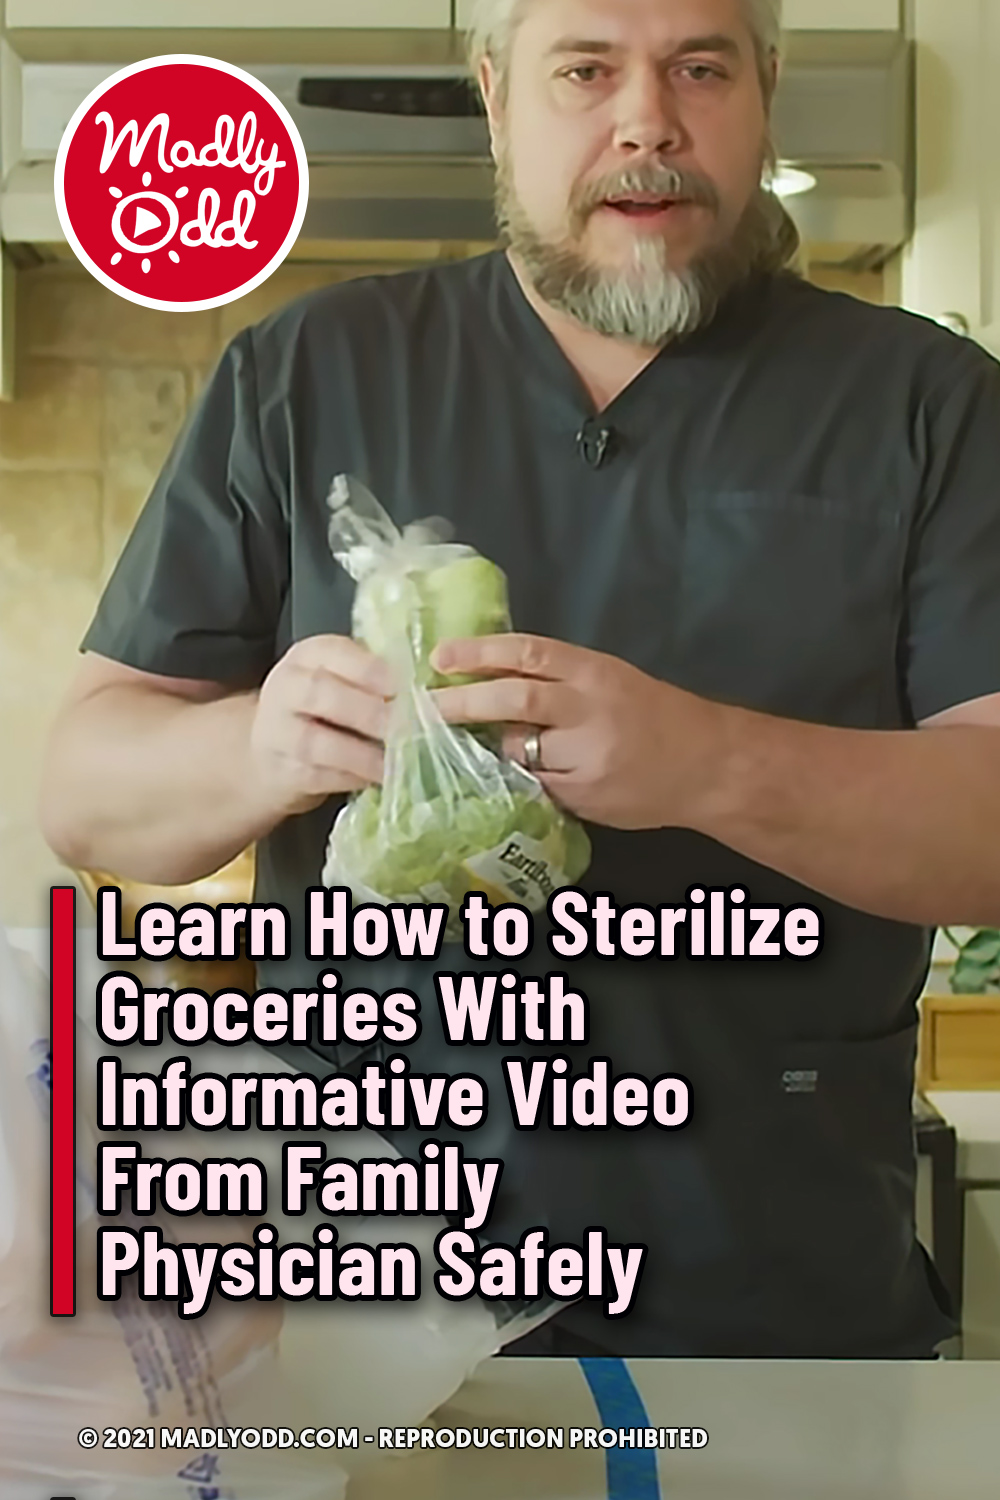 Learn How to Sterilize Groceries With Informative Video From Family Physician Safely